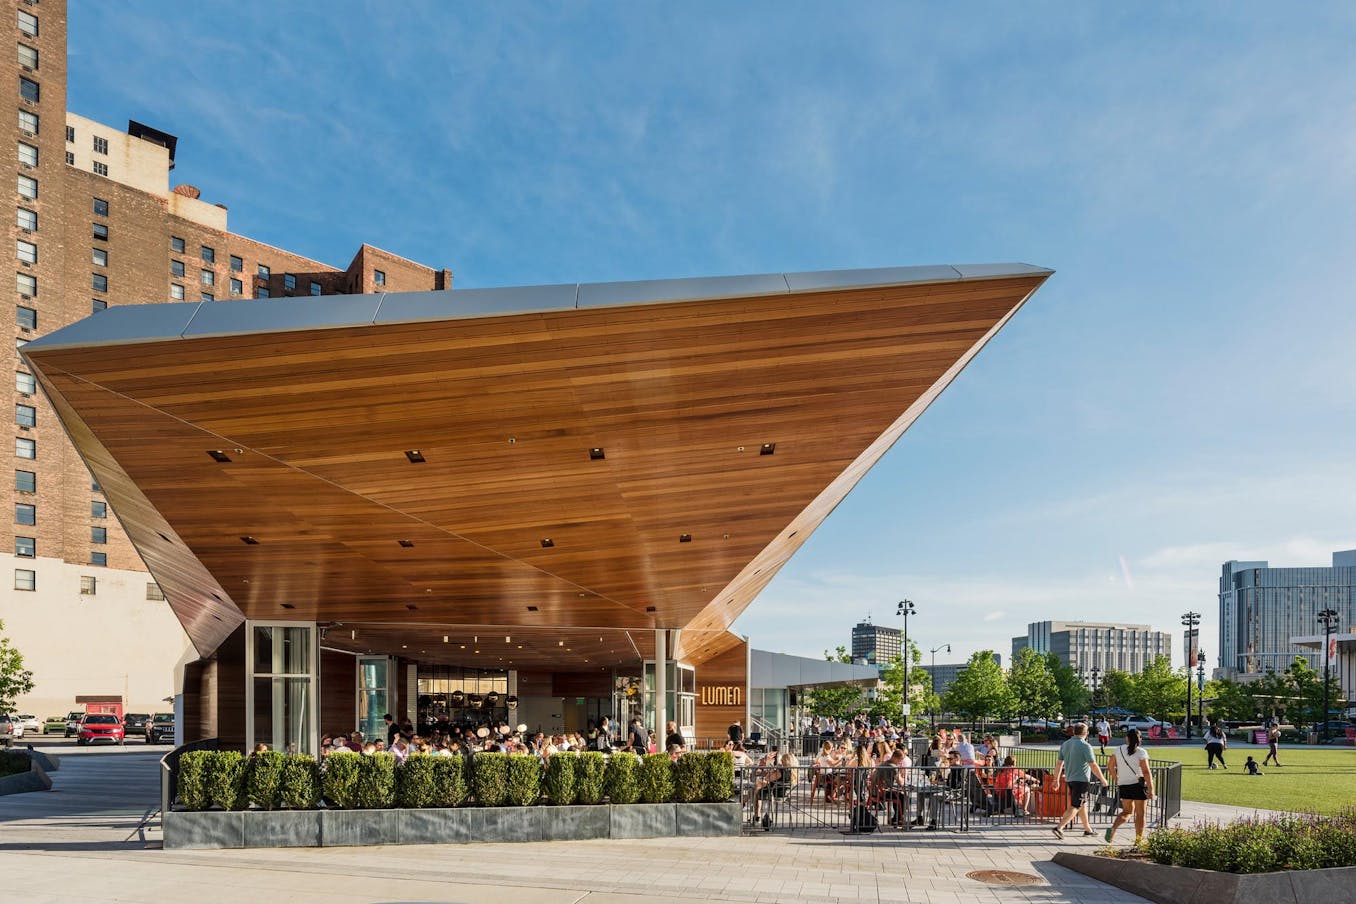 Lumen at Bacon Park in Detroit features a folding glass system